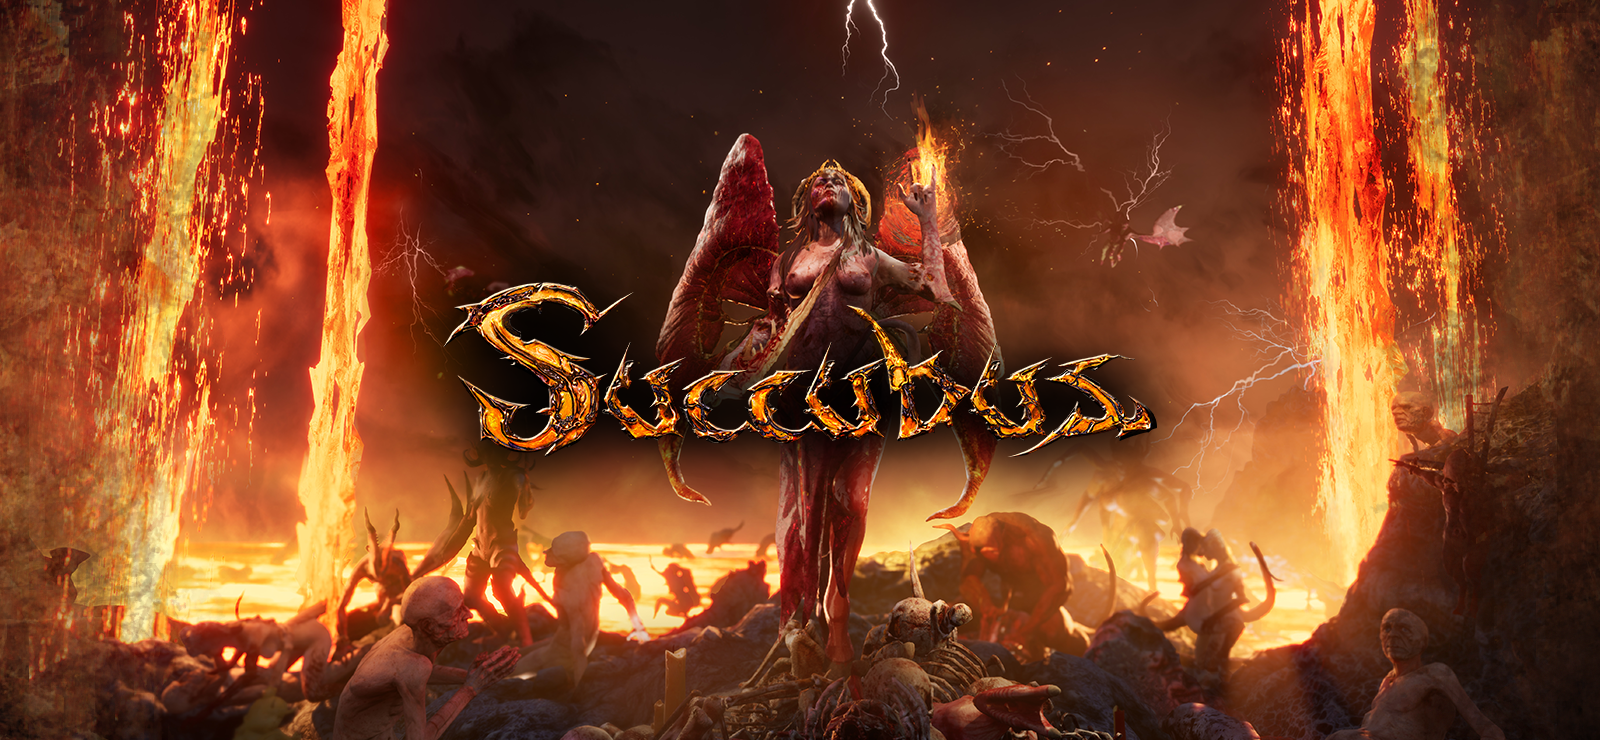 Succubus - Demons Of The Past